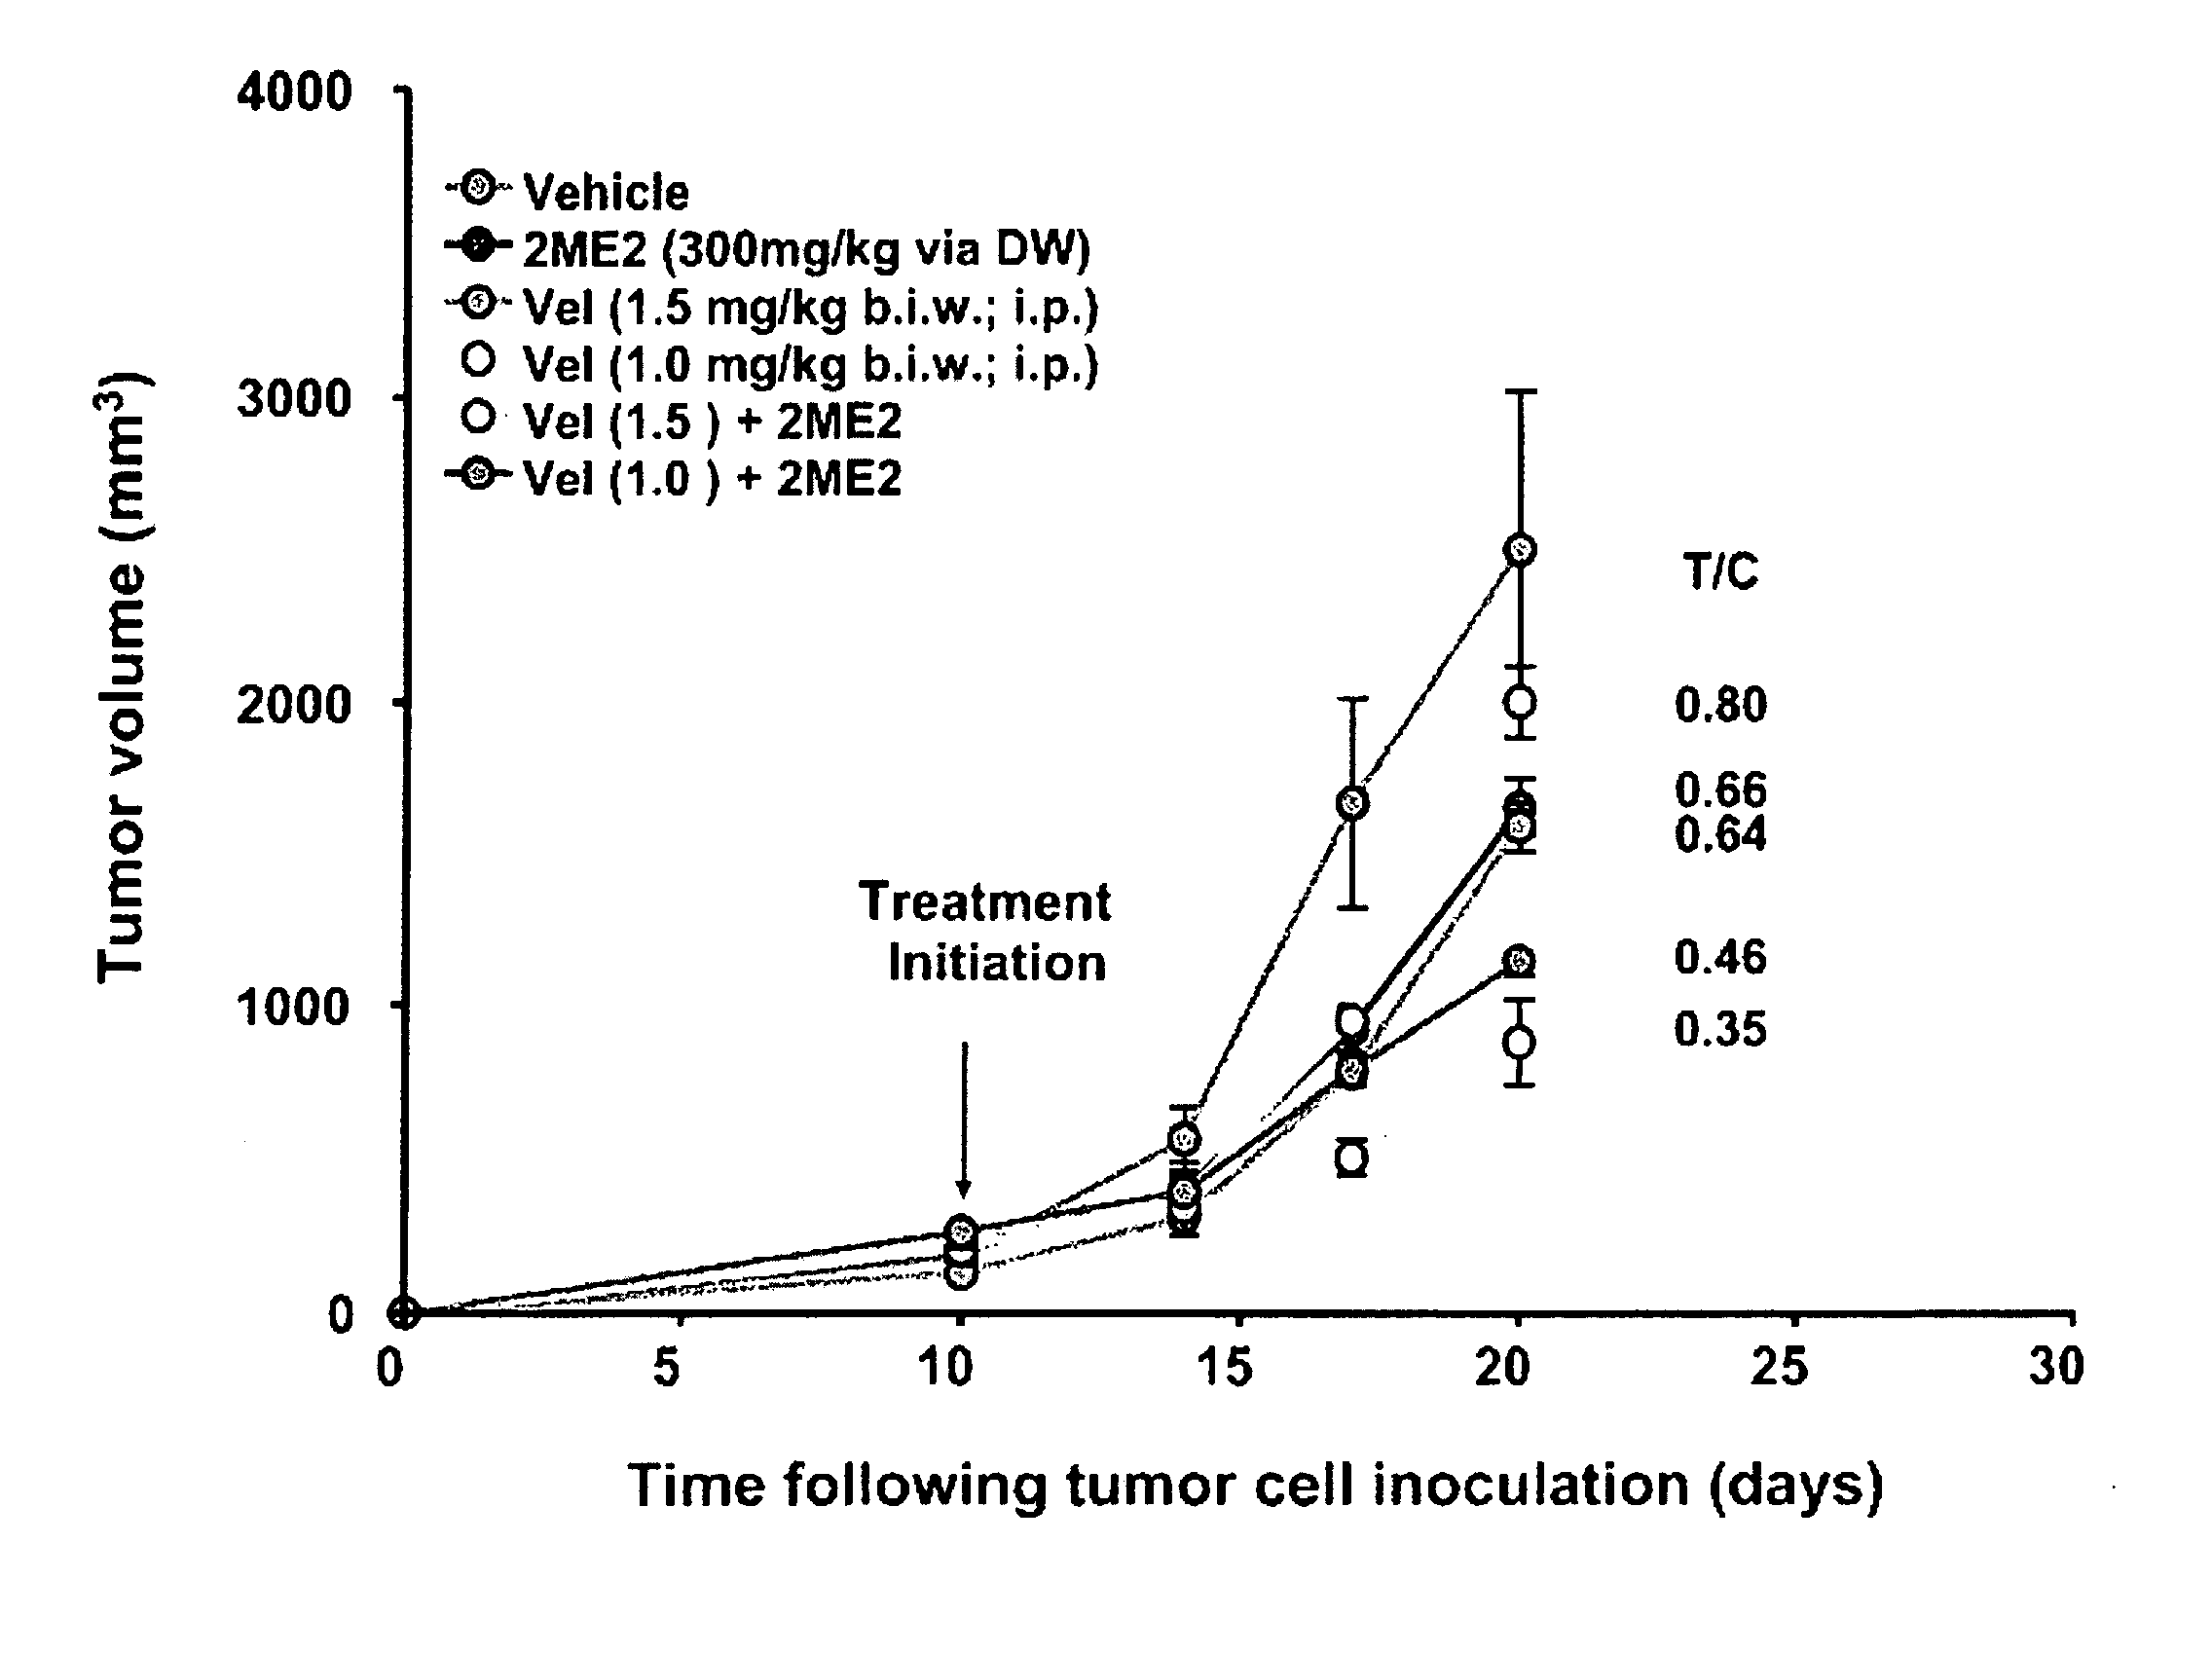 Anti-angiogenic activity of 2-methoxyestradiol in combination with anti-cancer agents